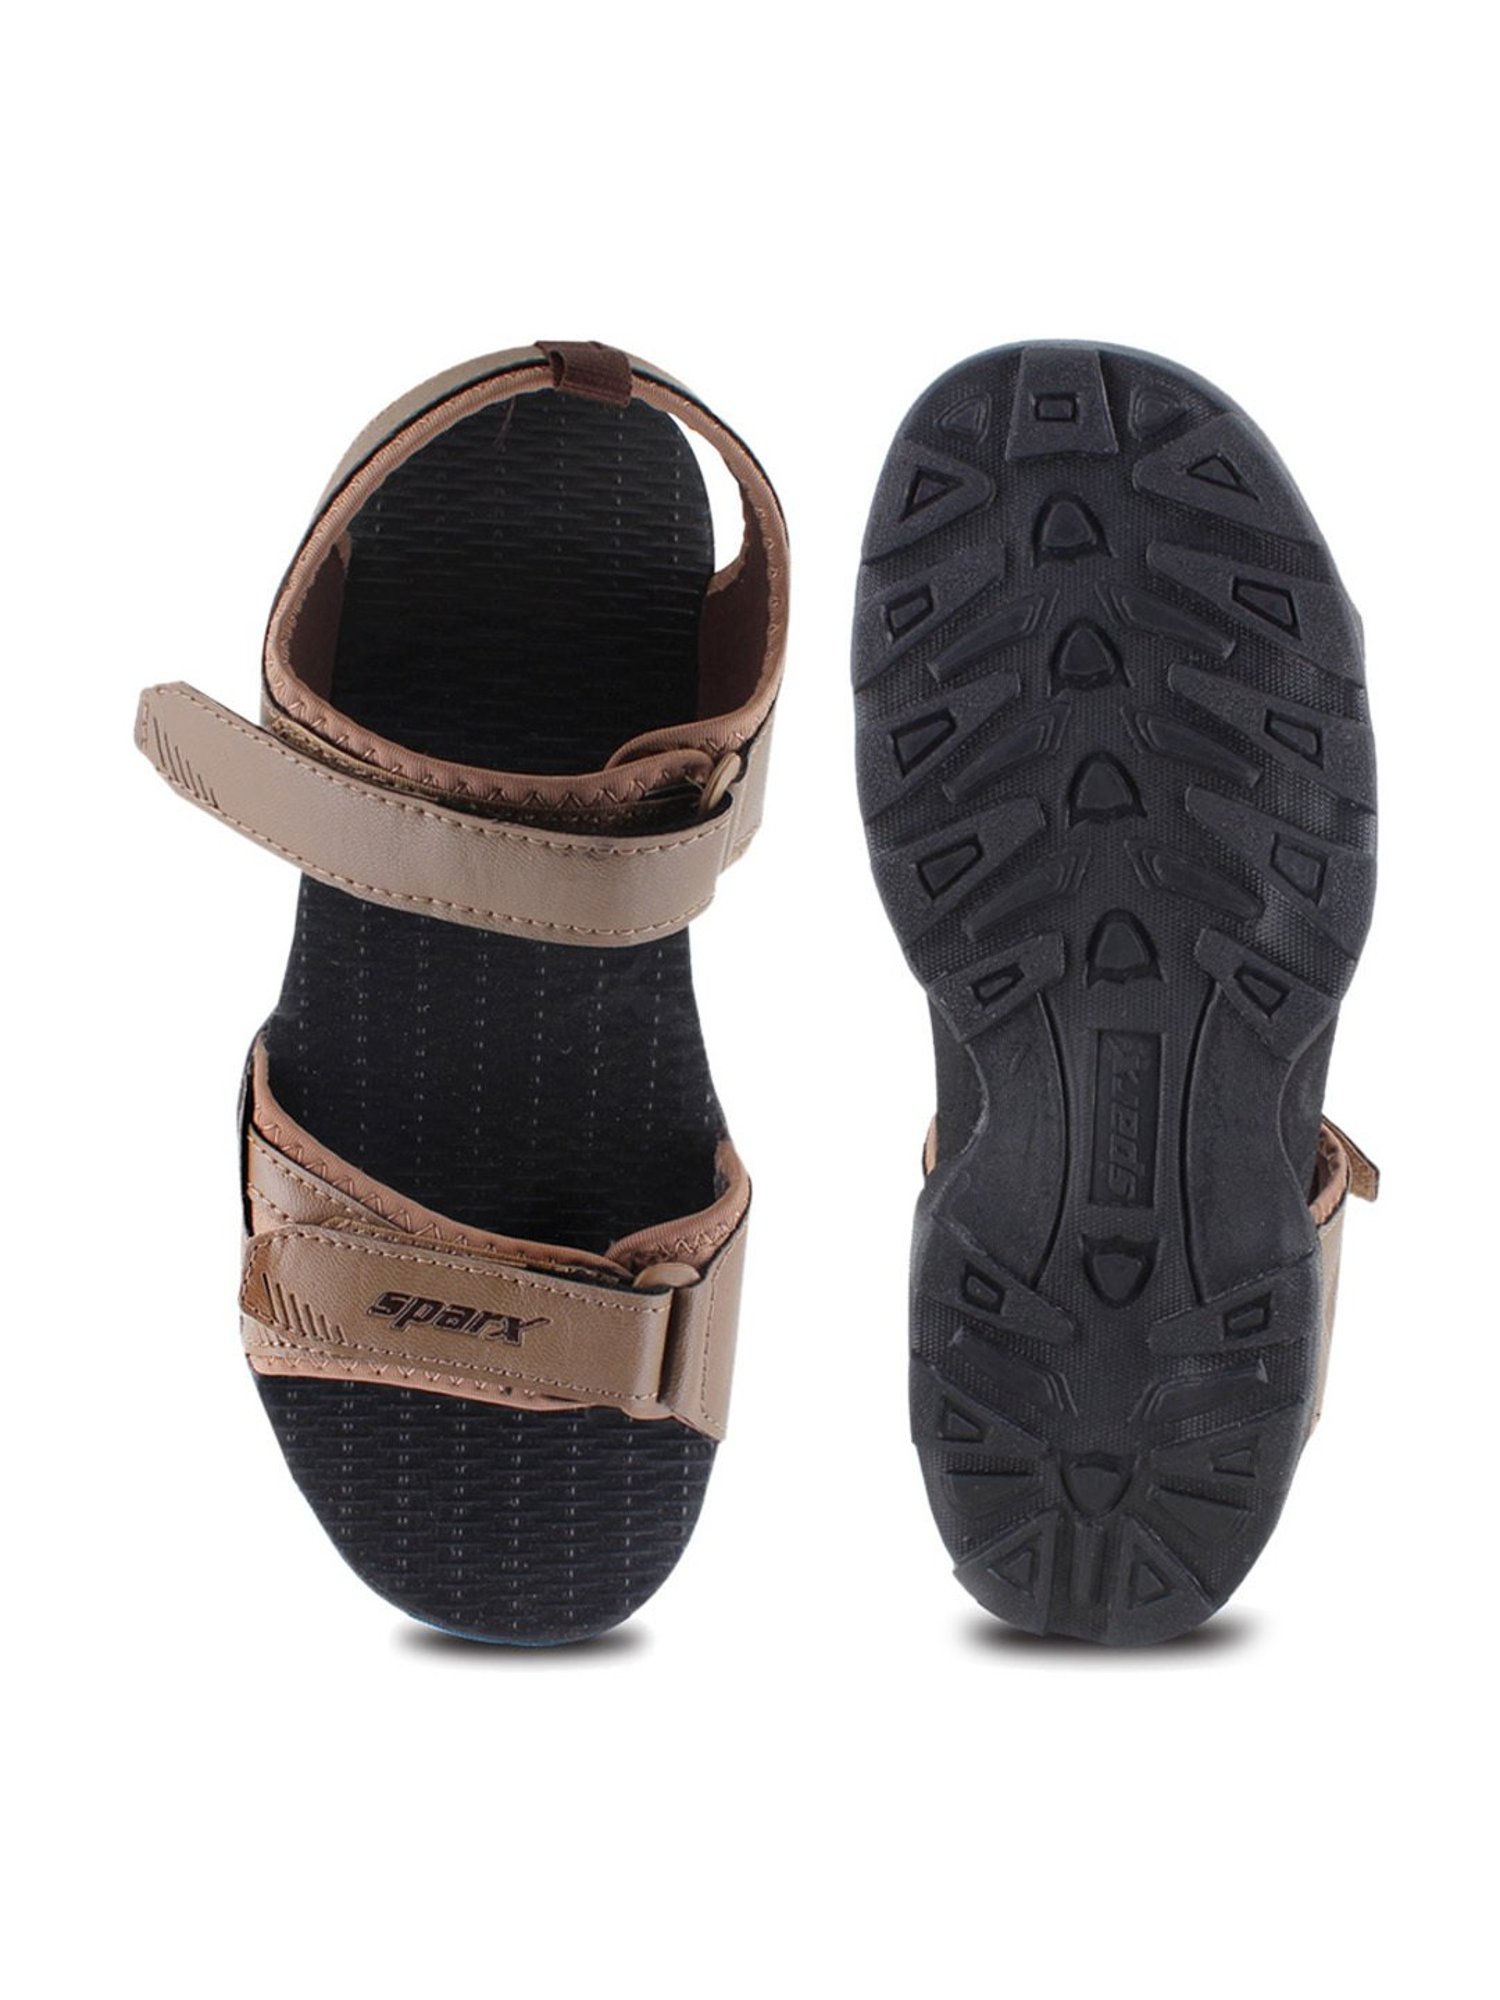 Sparx Sandals for Men SS-520 in Dehradun at best price by Khan Shoes Store  - Justdial